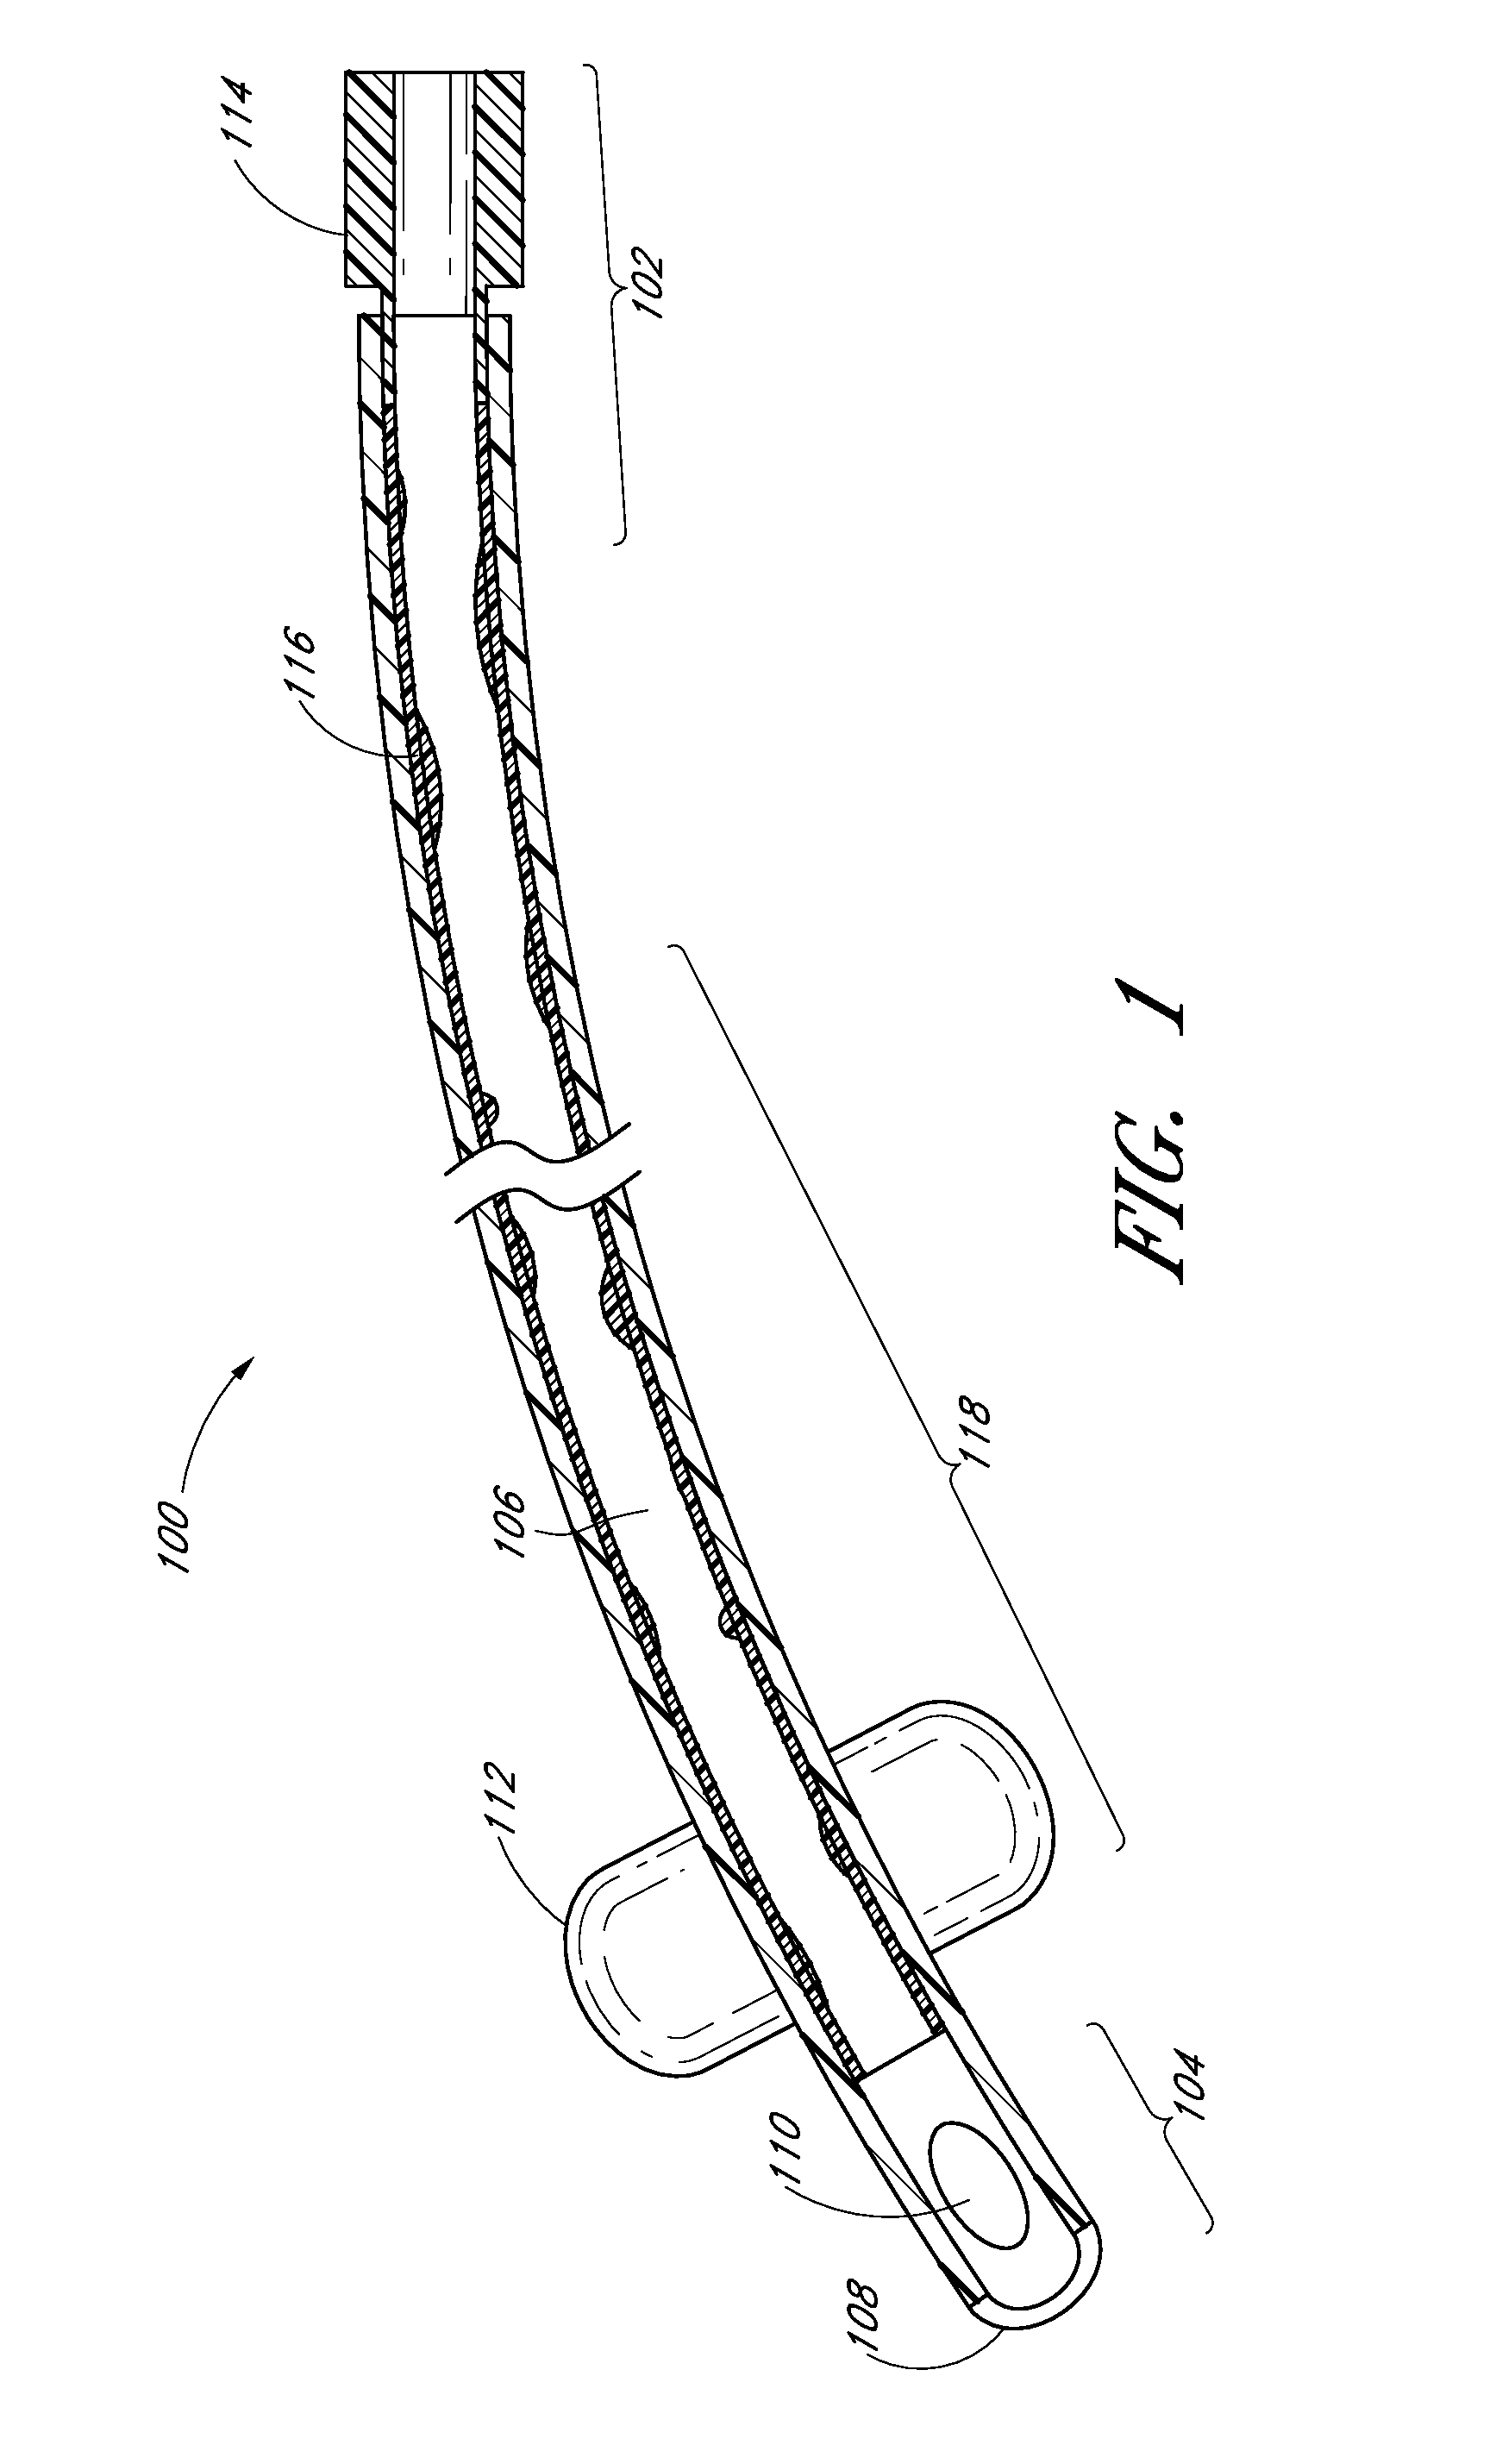 Medical tube cleaning apparatus